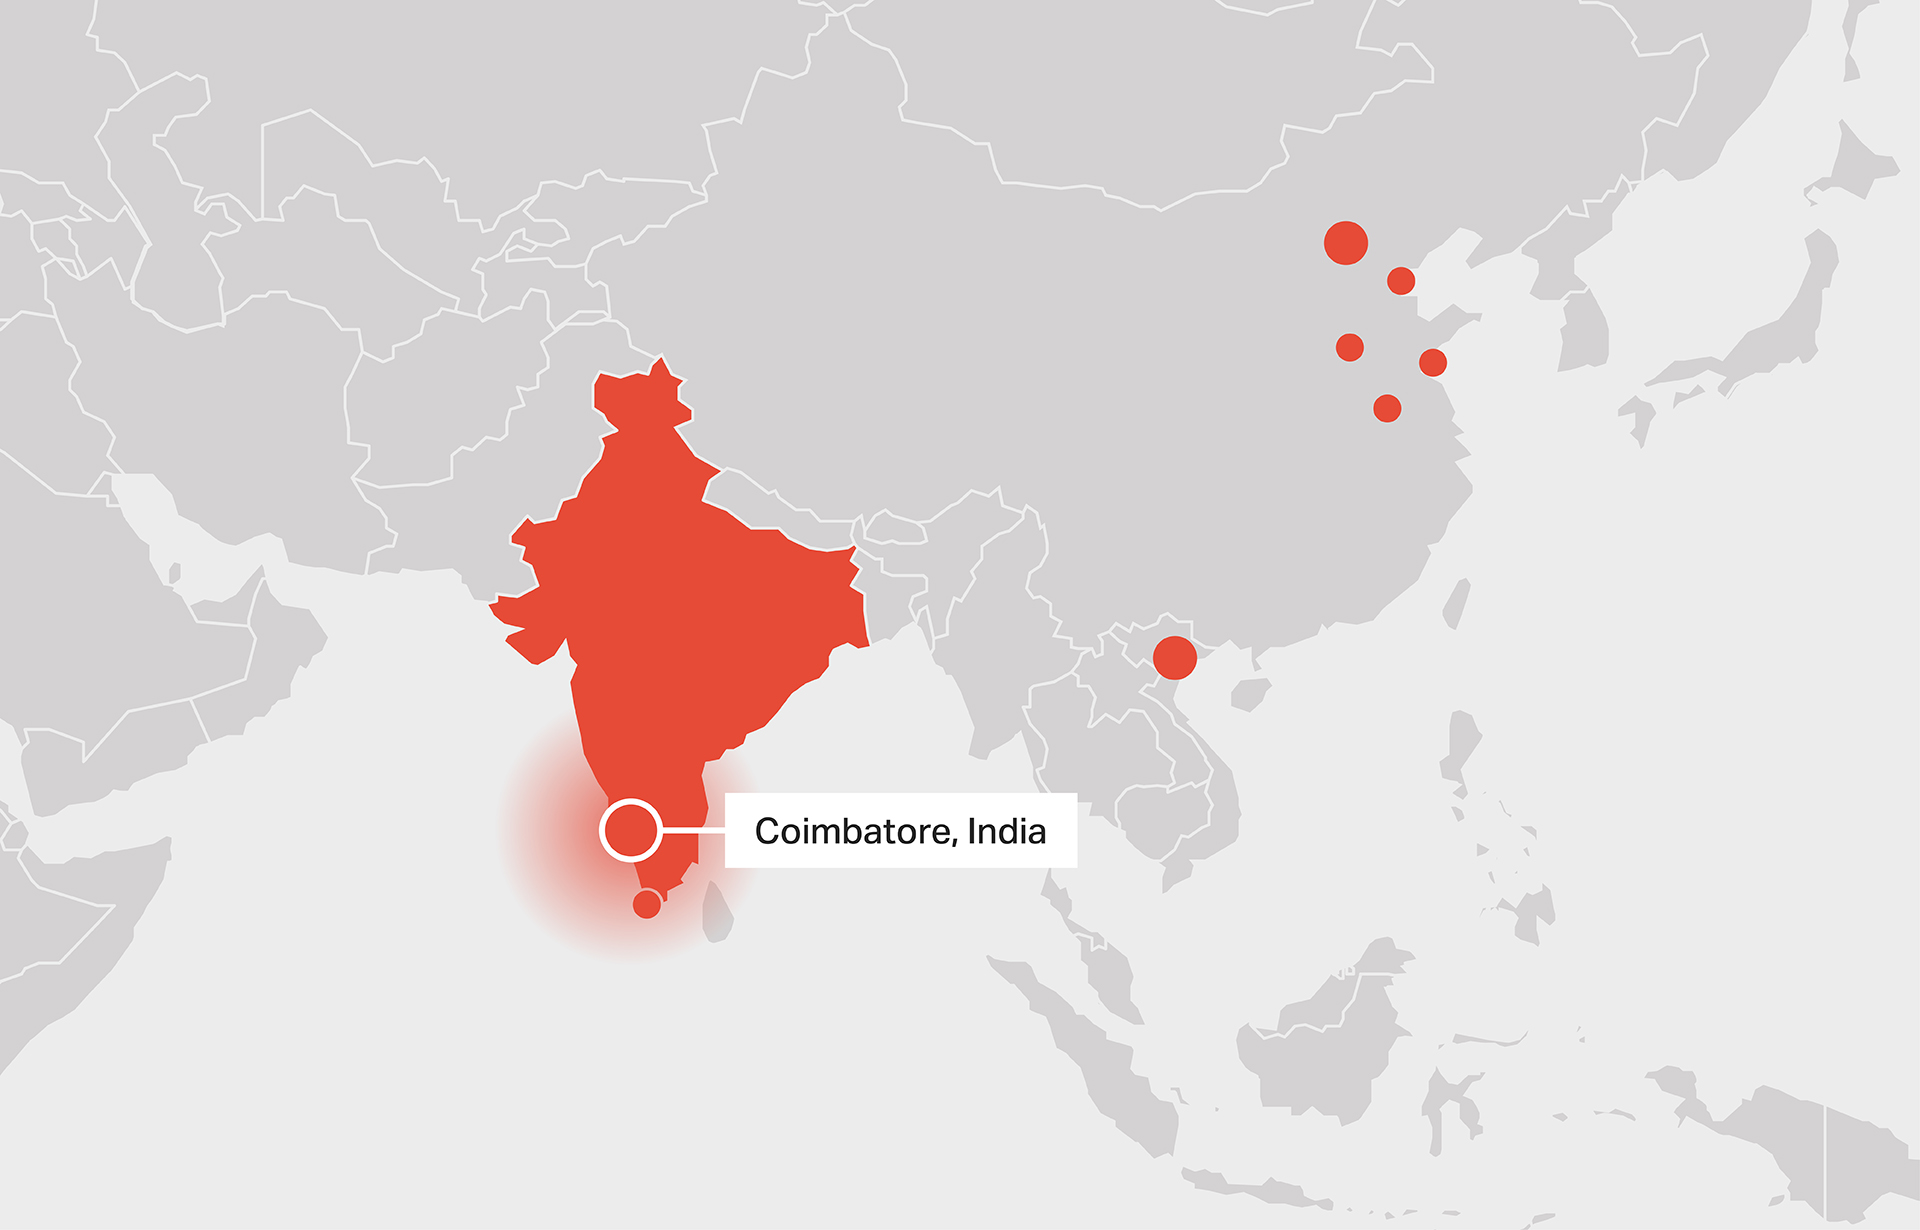 Map of Asia calling out EQI's offices in Coimbatore, India.